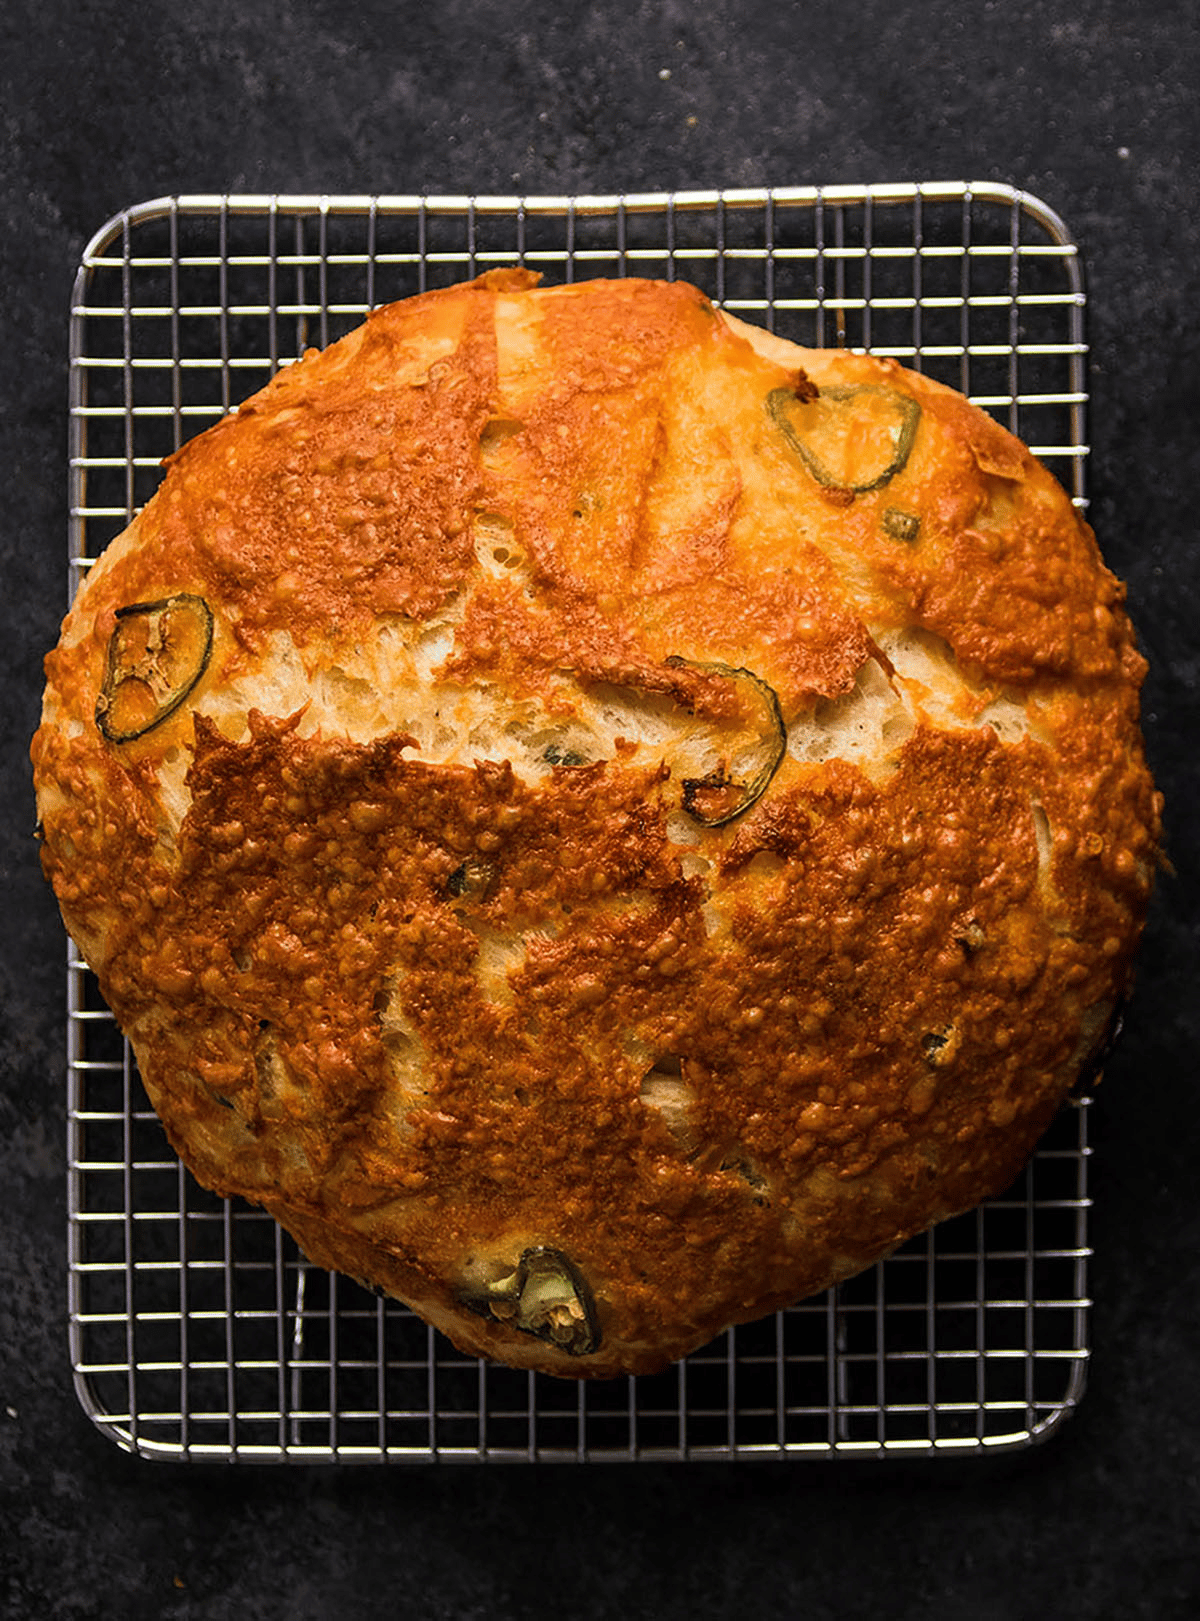 https://www.lifeasastrawberry.com/wp-content/uploads/2022/08/jalapen%CC%83o-cheddar-bread-recipe.png